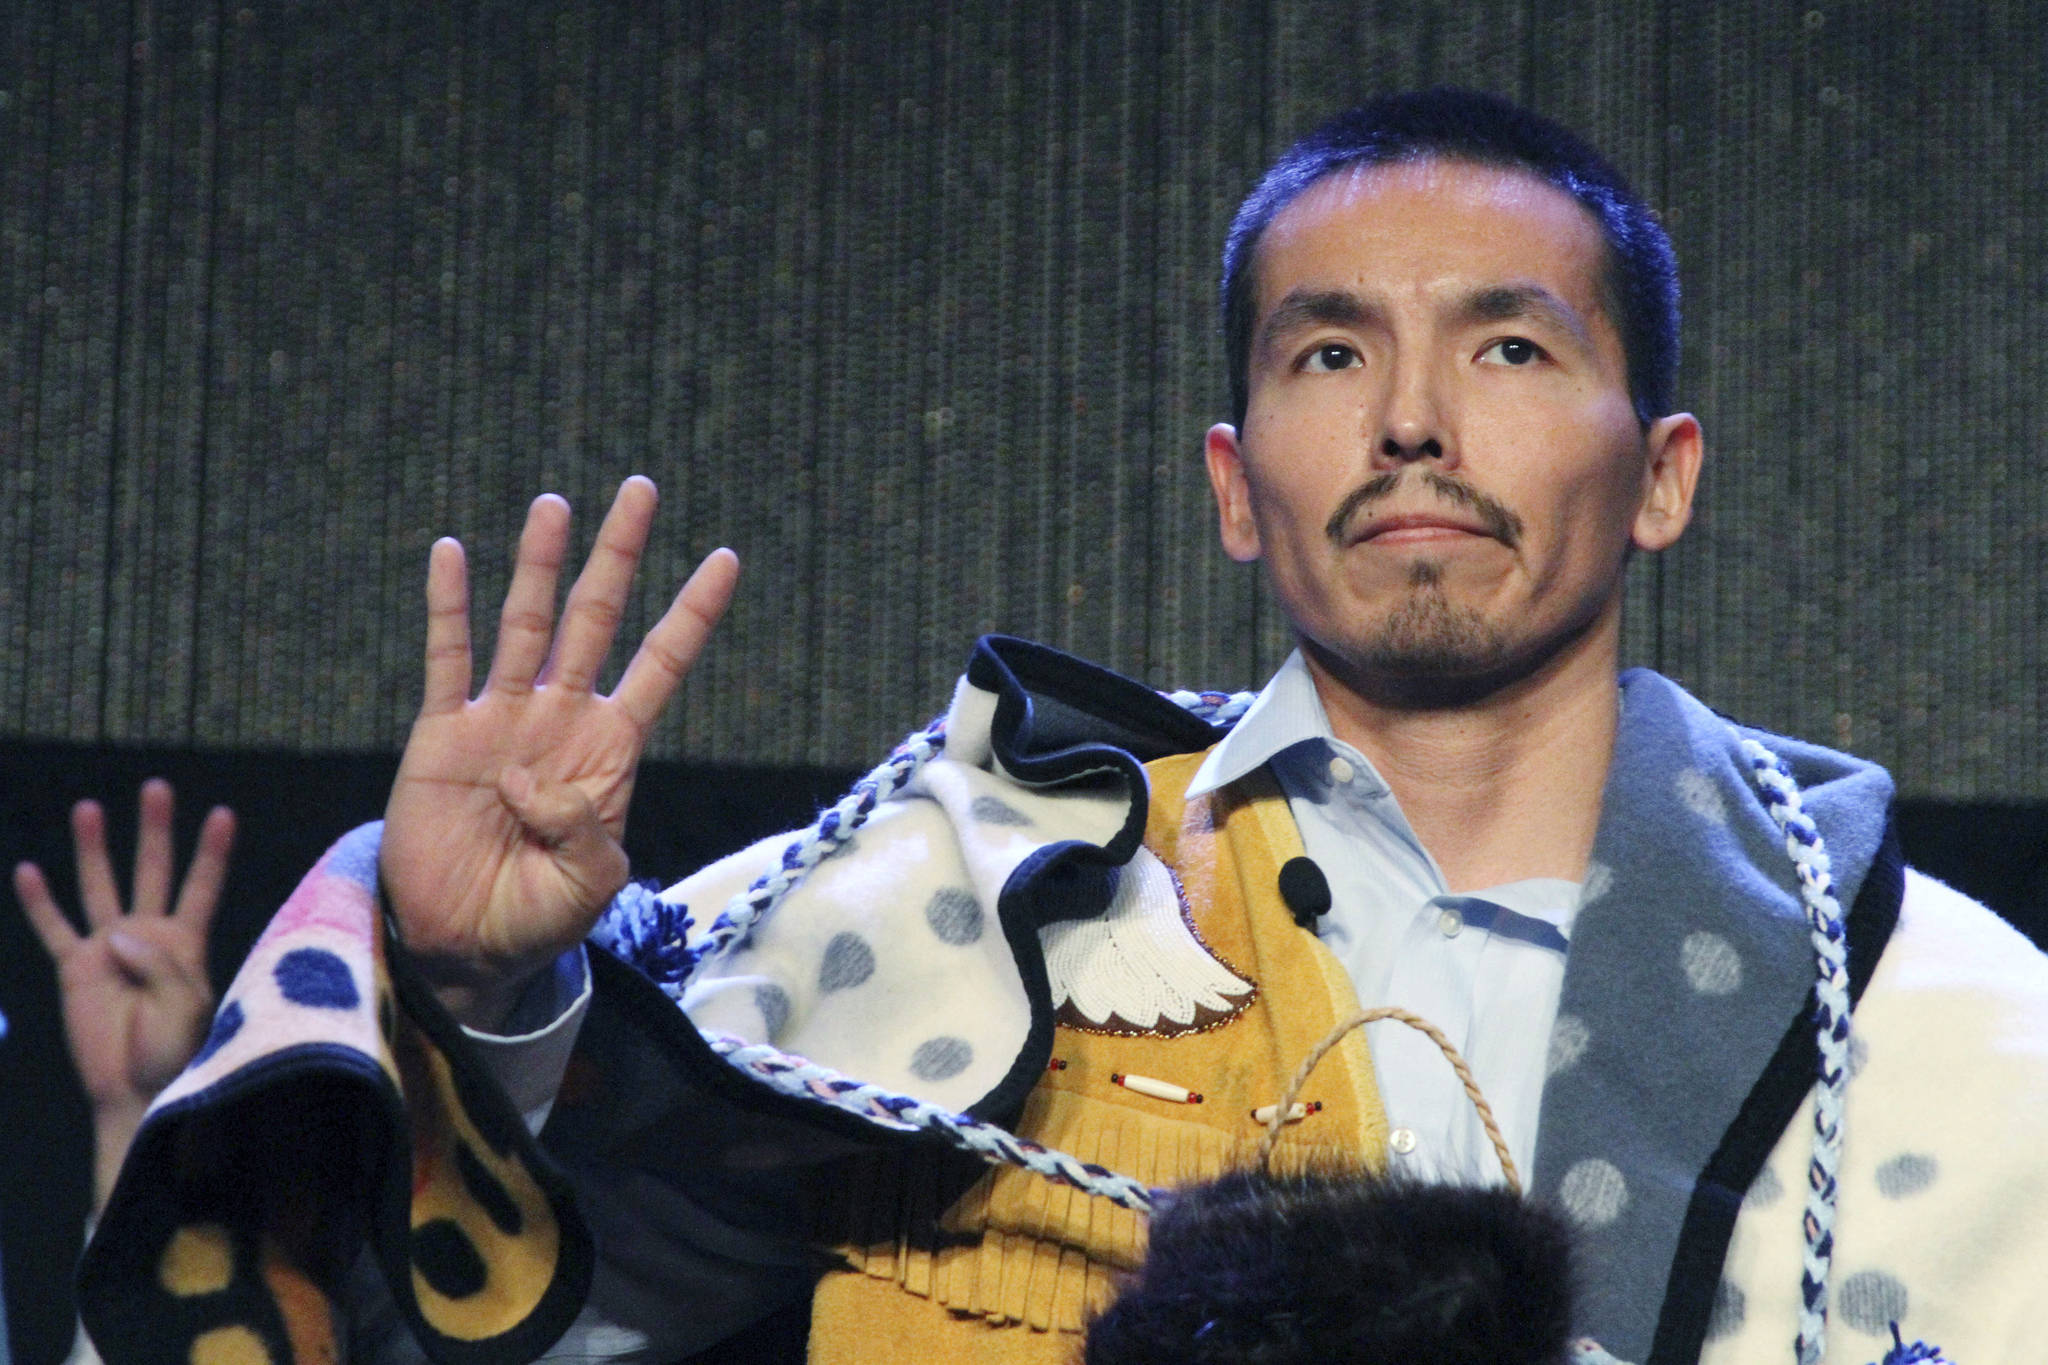 Marvin Roberts flashes four fingers in a sign of solidarity for the so-called Fairbanks Four following his address at the Alaska Federation of Natives conference in Anchorage in this 2017 photo. Roberts and three other men were convicted of killing a Fairbanks teenager in 1997. Four men who say they were illegally imprisoned for nearly two decades for the murder of a teenager in Alaska will have their lawsuit go forward after the U.S. Supreme Court declined to get involved in the case. The high court turned away the case Monday. As is typical, the justices did not comment in rejecting the case. That leaves in place a decision by the 9th U.S. Circuit Court of Appeals. In January of last year it overturned a lower court ruling that had dismissed a lawsuit by the “Fairbanks Four” against the city of Fairbanks. (AP Photo / Mark Thiessen)